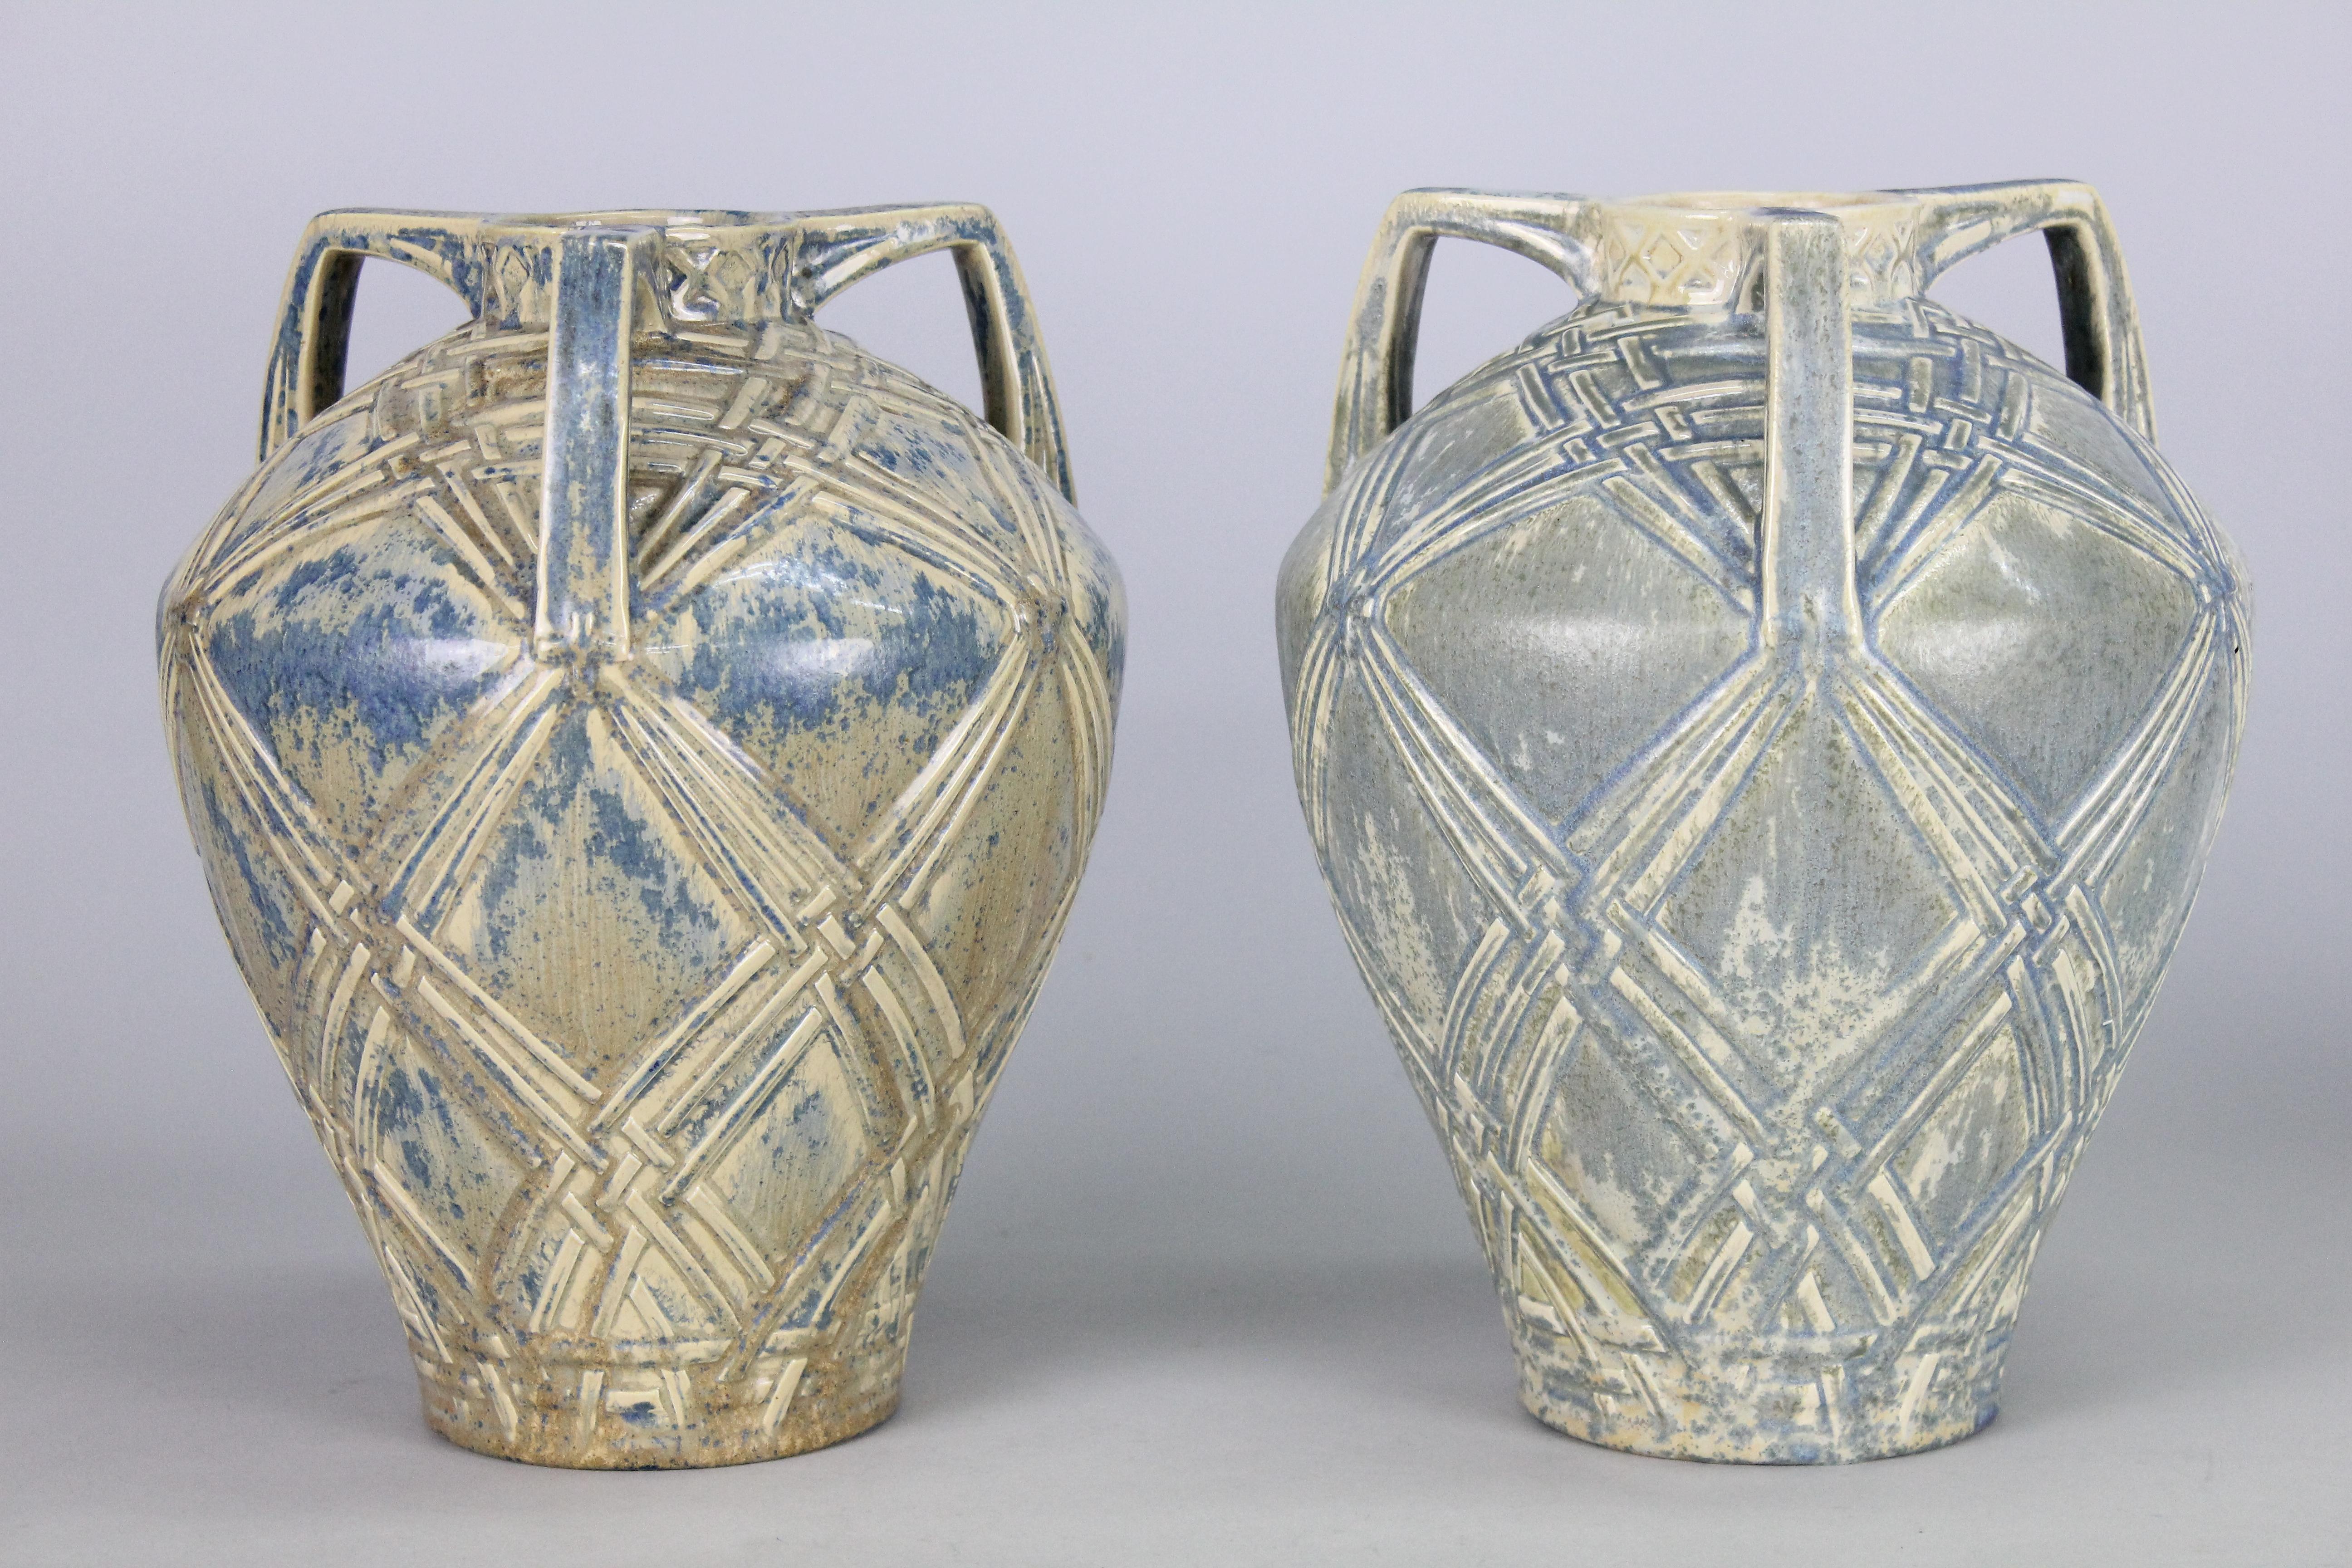 A very unusual pair of earthenware Rörstrand vases. Made in between 1920-1936.
Most likely designed by Alf Wallander. Some minor differences in the color of the glaze.
Signed with factory mark 